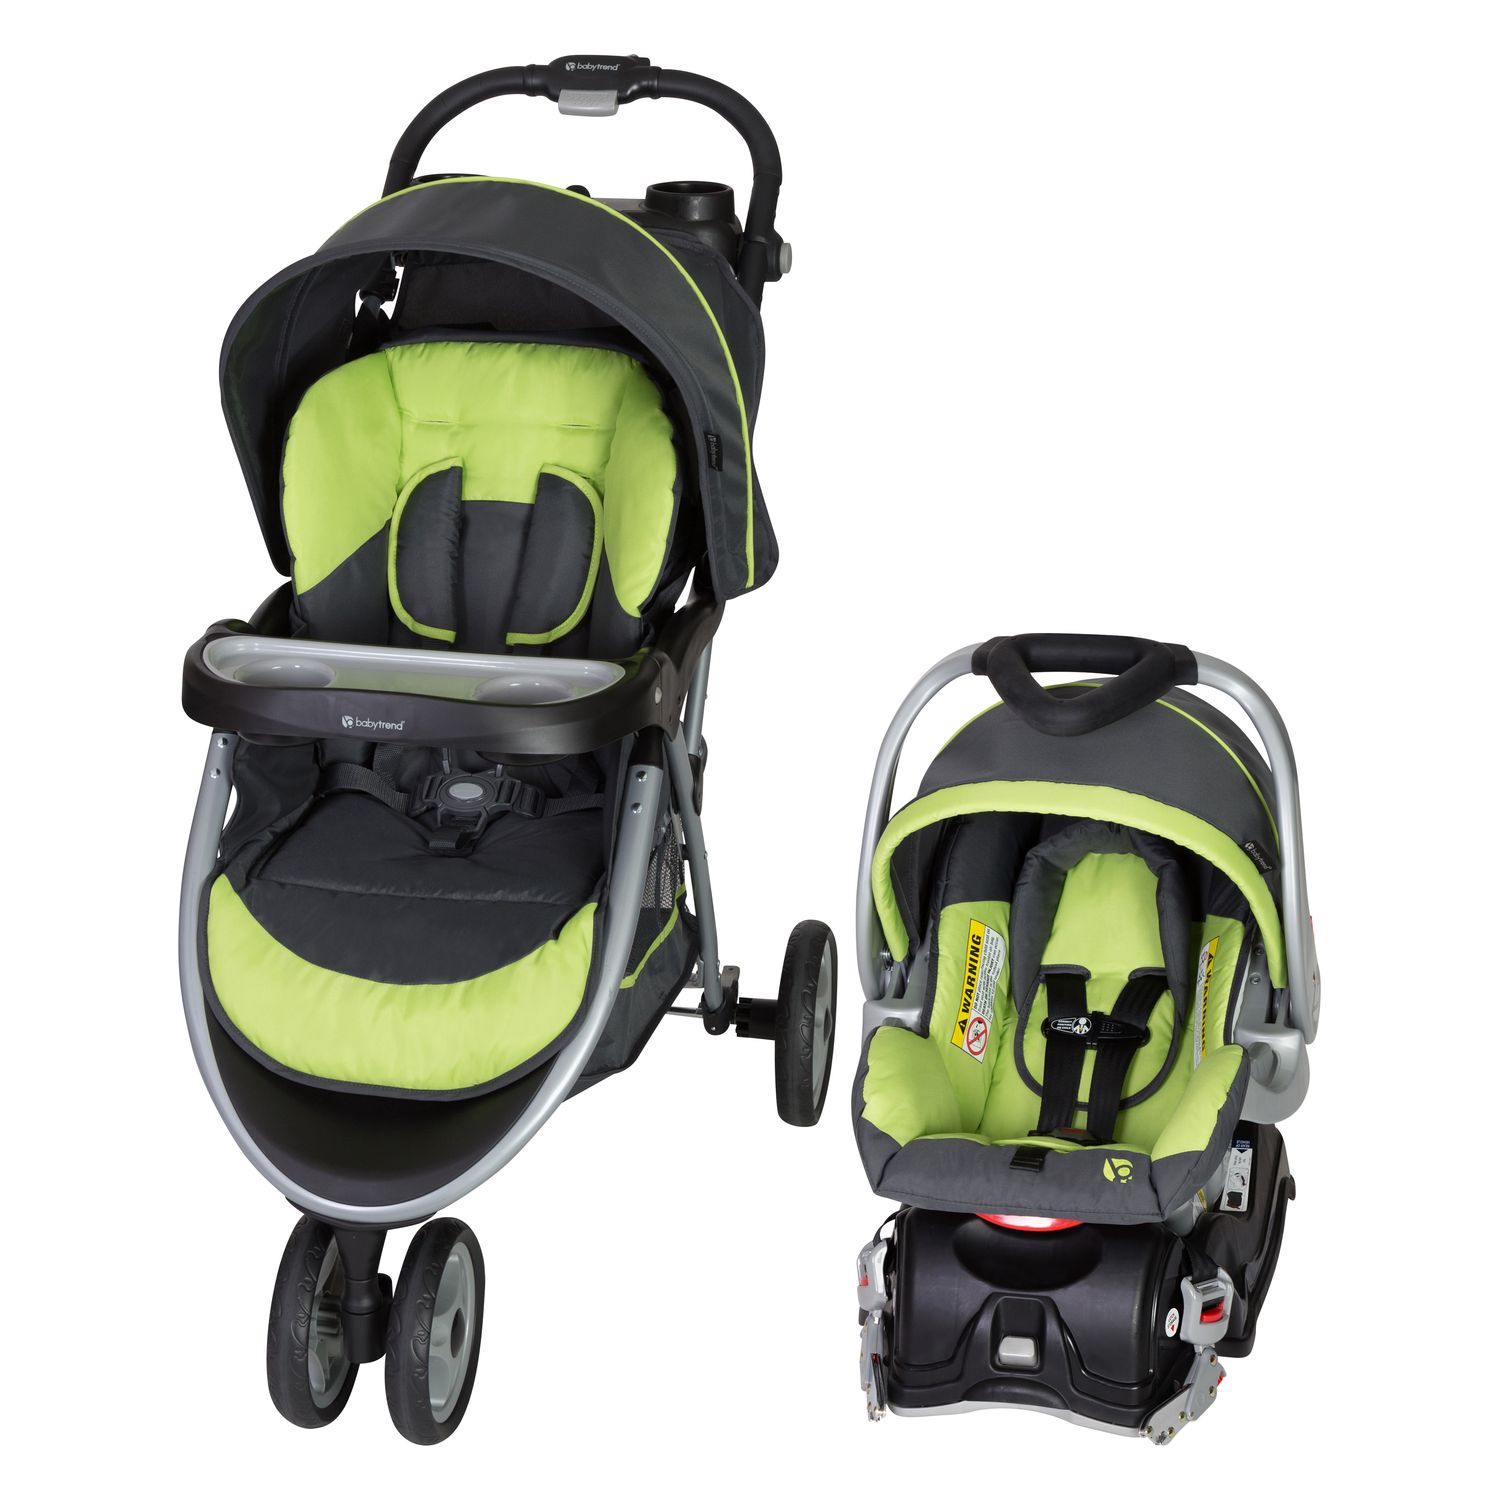 baby trend ez ride 35 travel system reviews